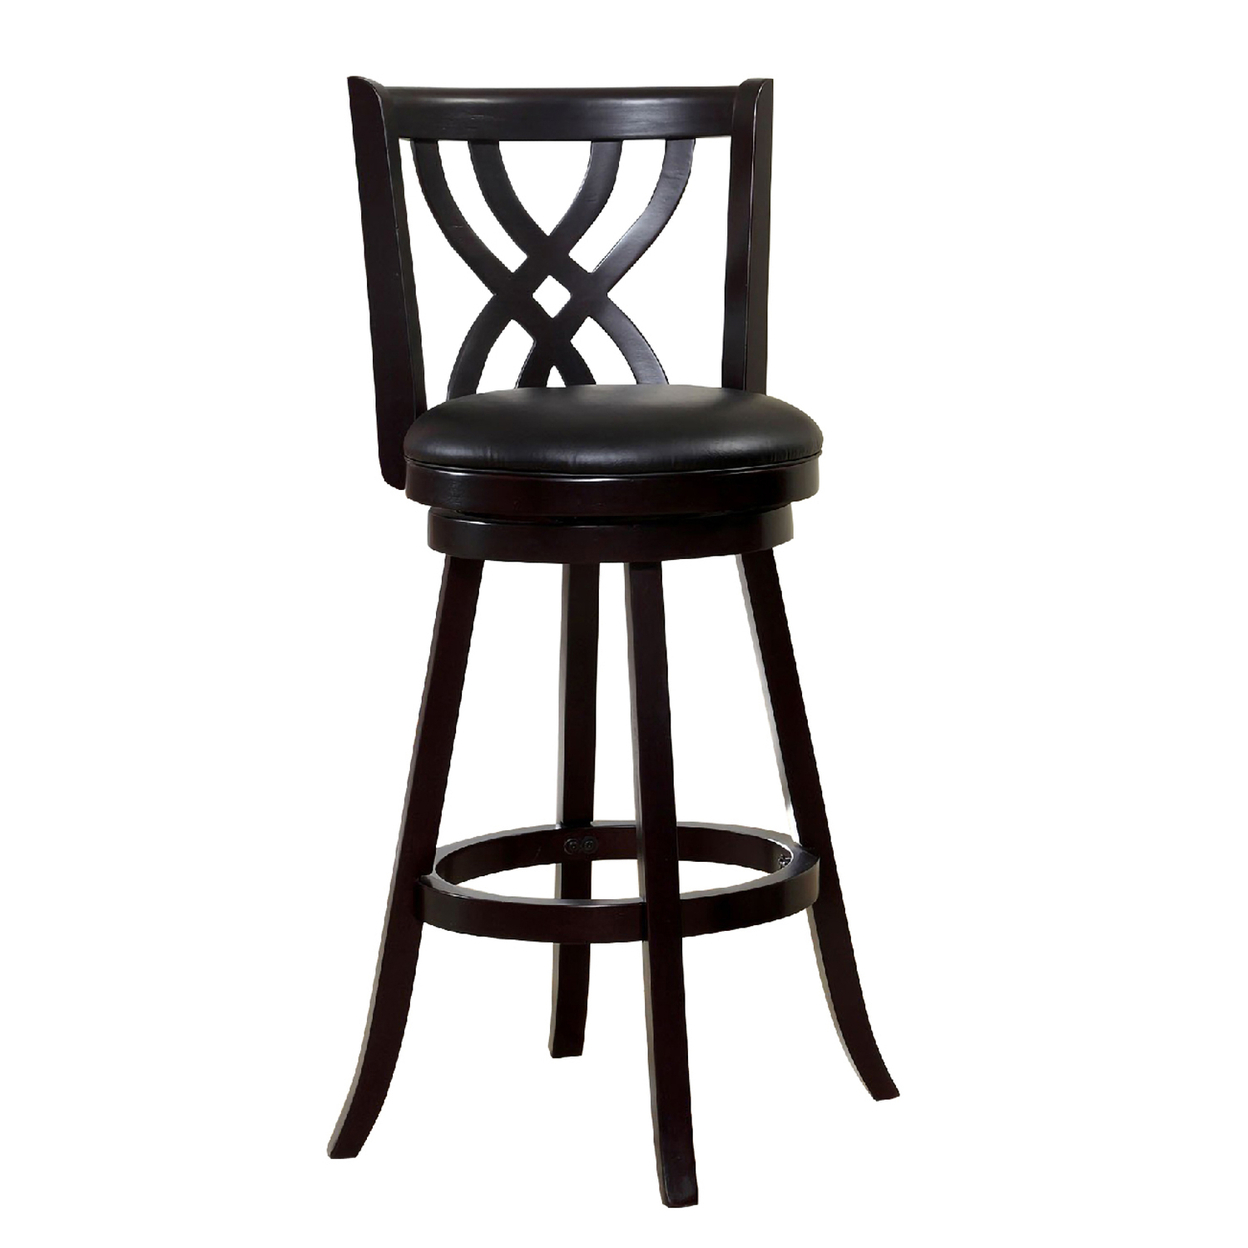 Swivel Barstool With Curved Double X Shaped Wooden Back, Espresso Brown- Saltoro Sherpi